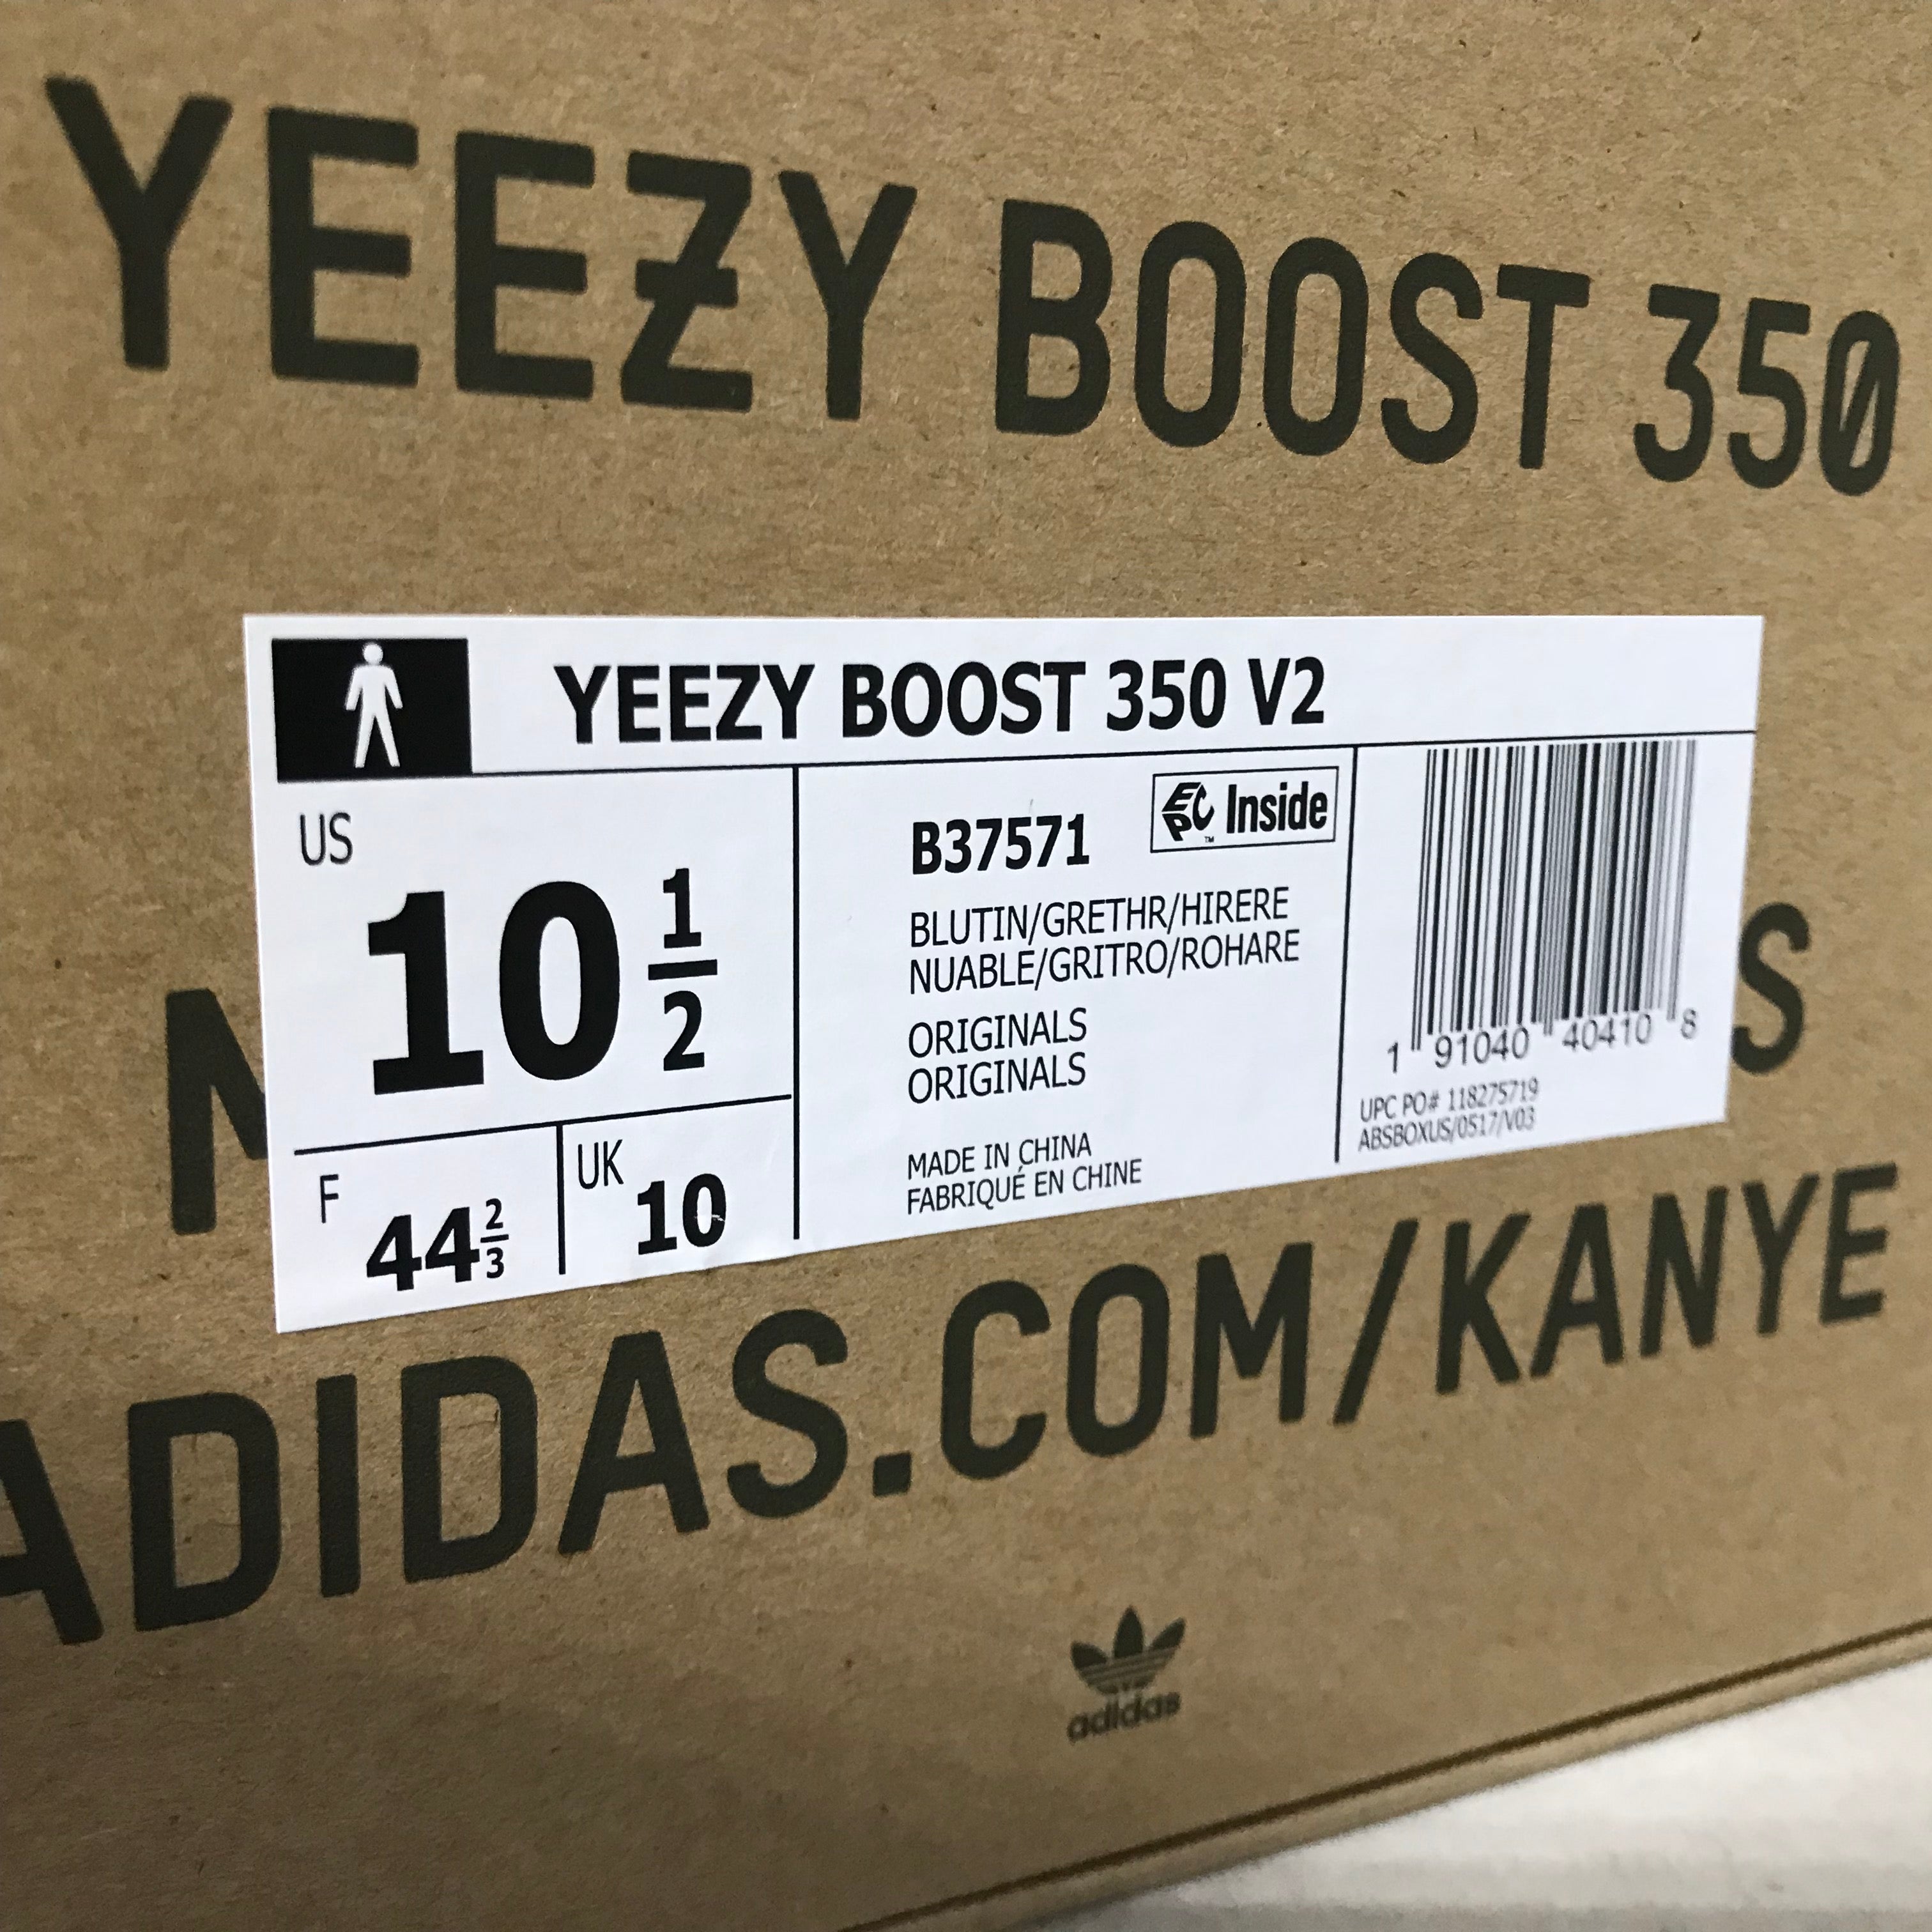 yeezy blue tint stock numbers